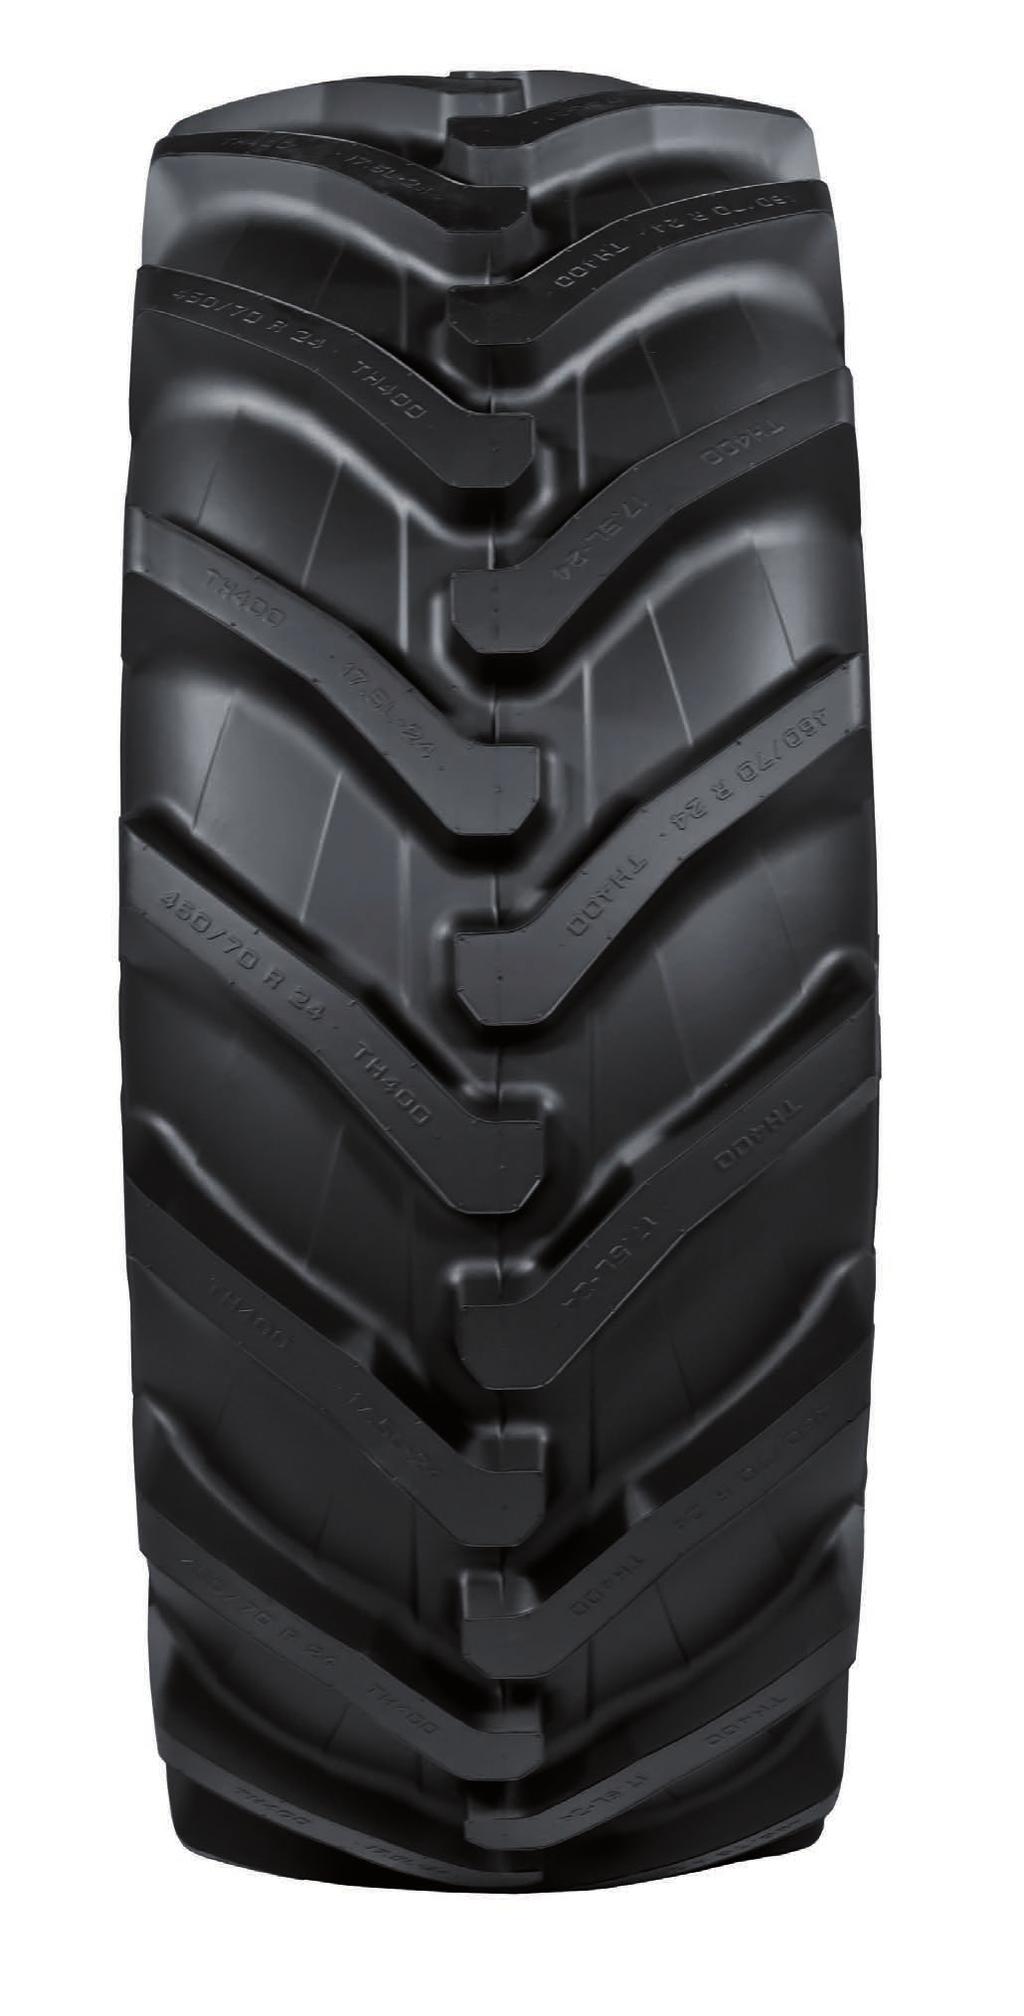 Excellent resistance to abrasion and wear The innovative TH400 tread pattern has been engineered and designed to maximize abrasion and wear resistance, boosting the overall strength and mileage of